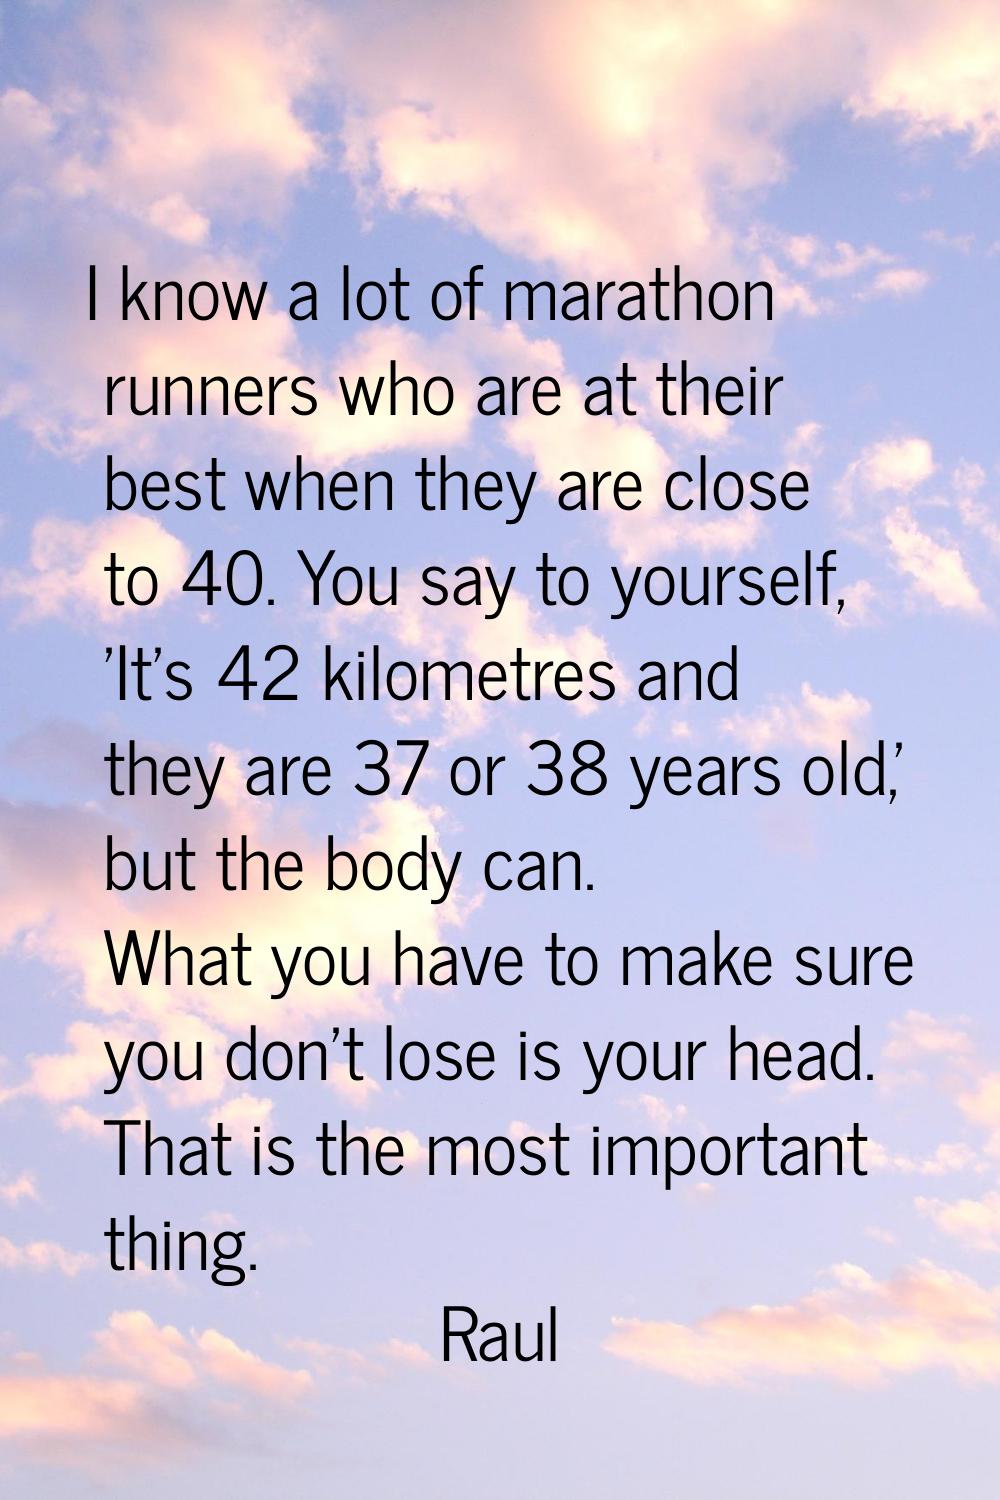 I know a lot of marathon runners who are at their best when they are close to 40. You say to yourse